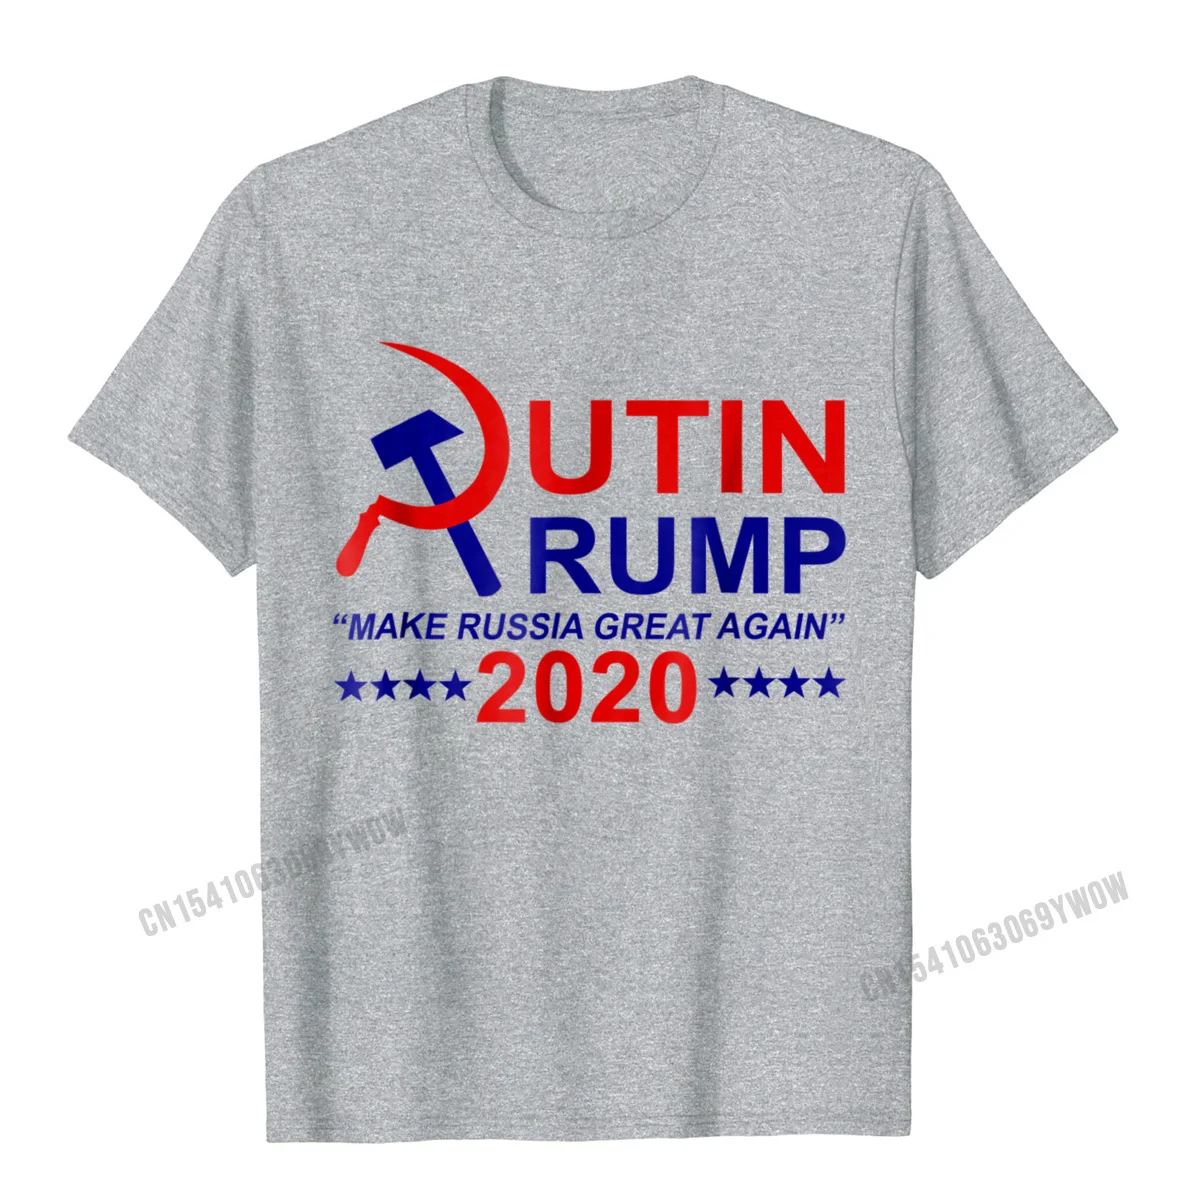 Cool Short Sleeve Tops Tees Autumn Crewneck 100% Cotton Fabric Men T Shirts Birthday Cool T Shirt Fitted Top Quality Putin Trump make Russia great again 2020 election t-shirt__223 grey